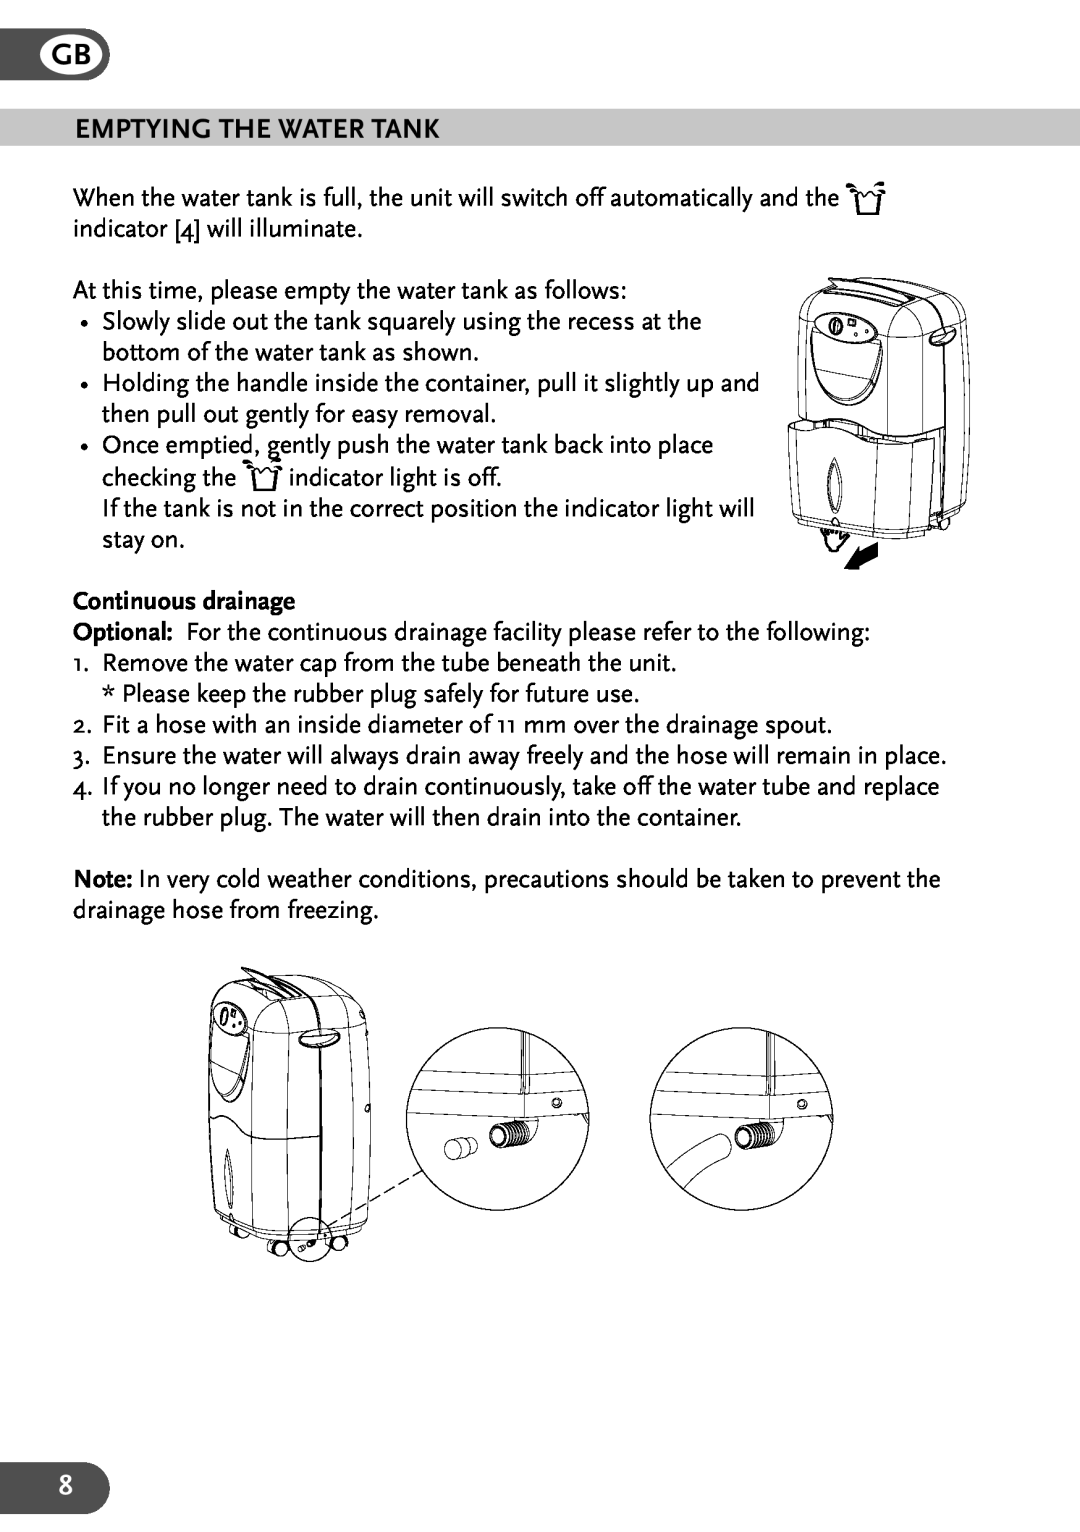 Amcor QT 120 instruction manual Emptying The Water Tank, Continuous drainage 